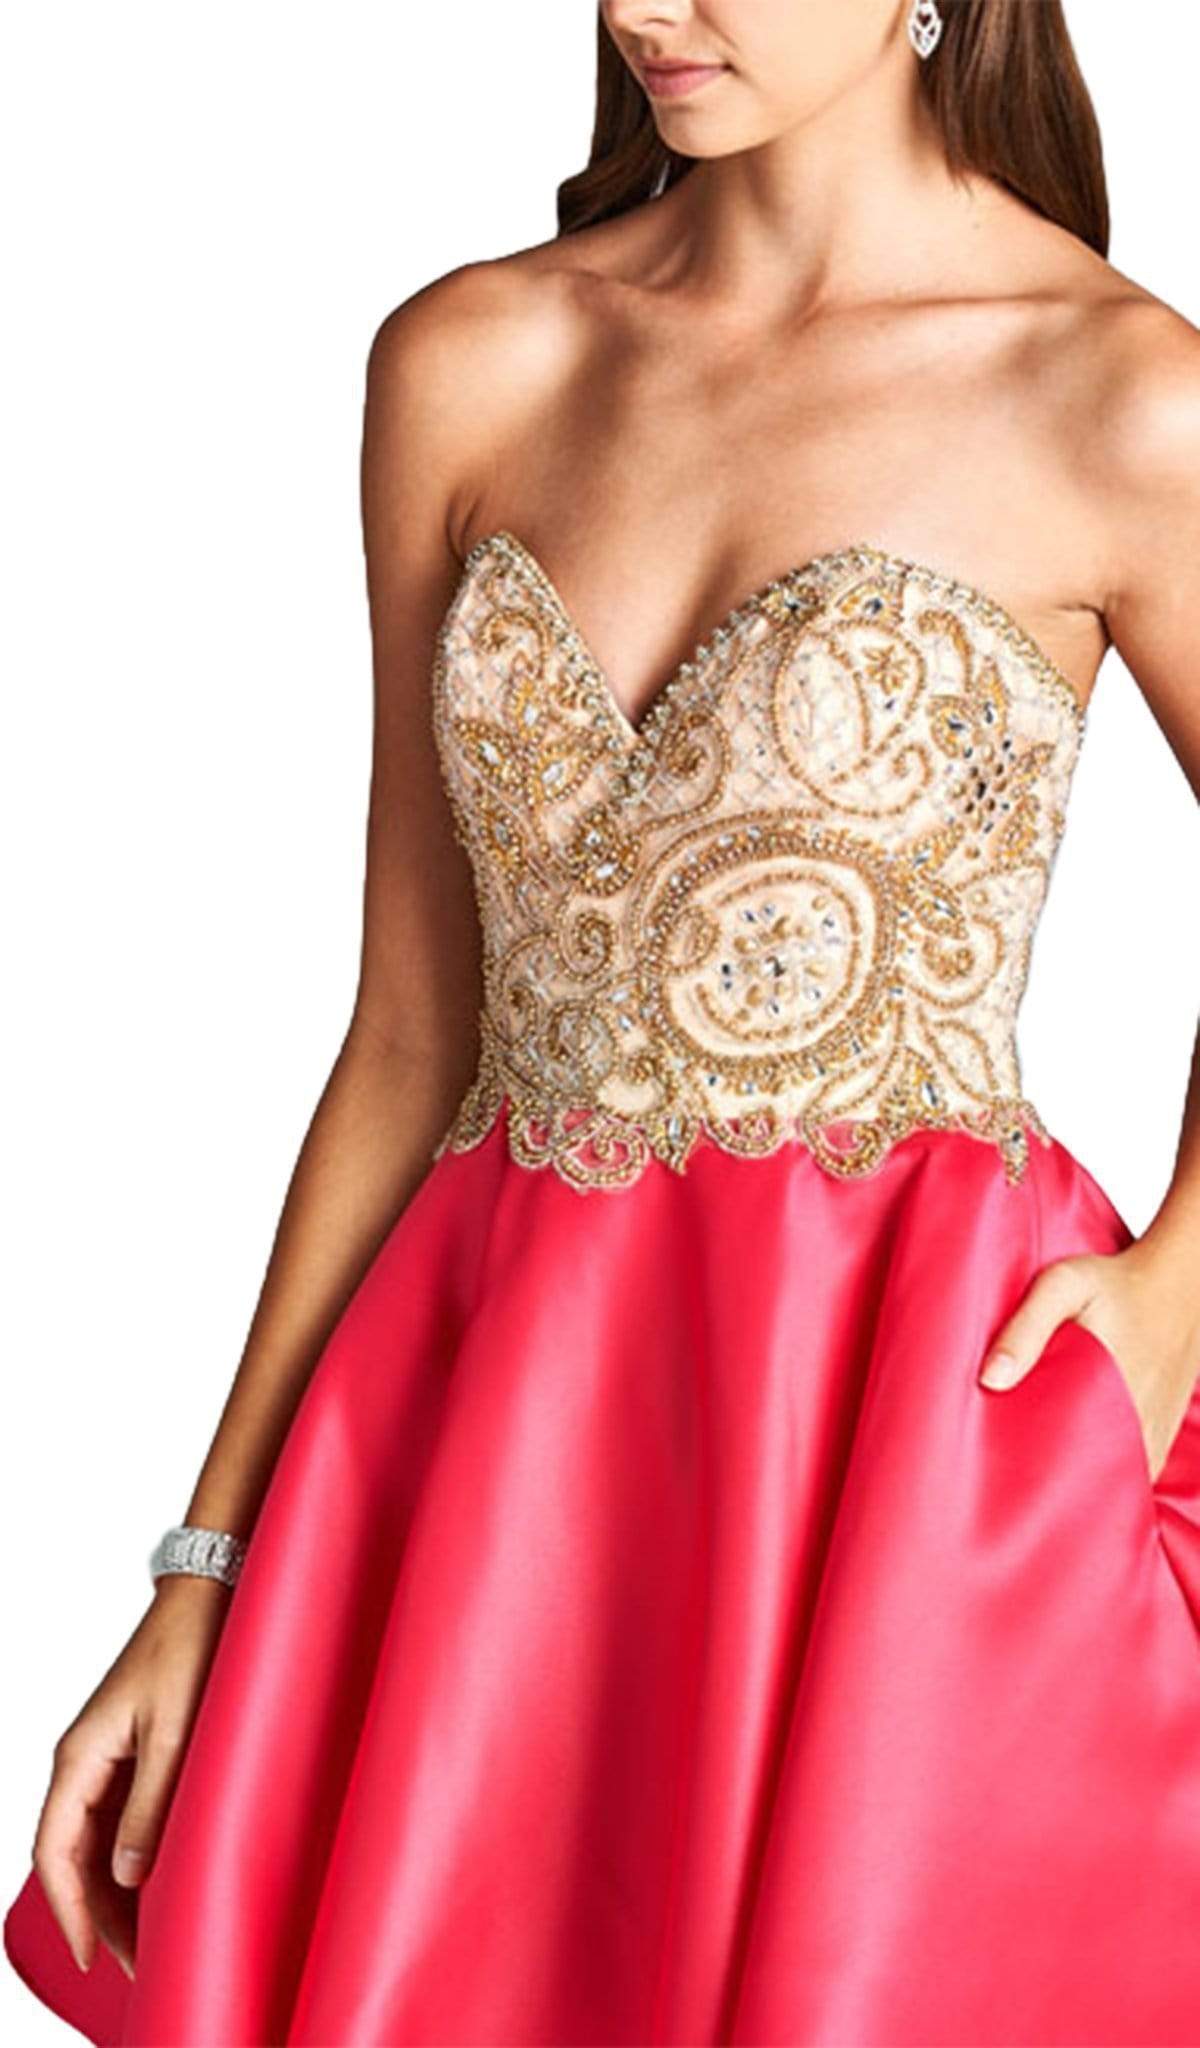 Strapless Embellished A-line Homecoming Dress Homecoming Dresses